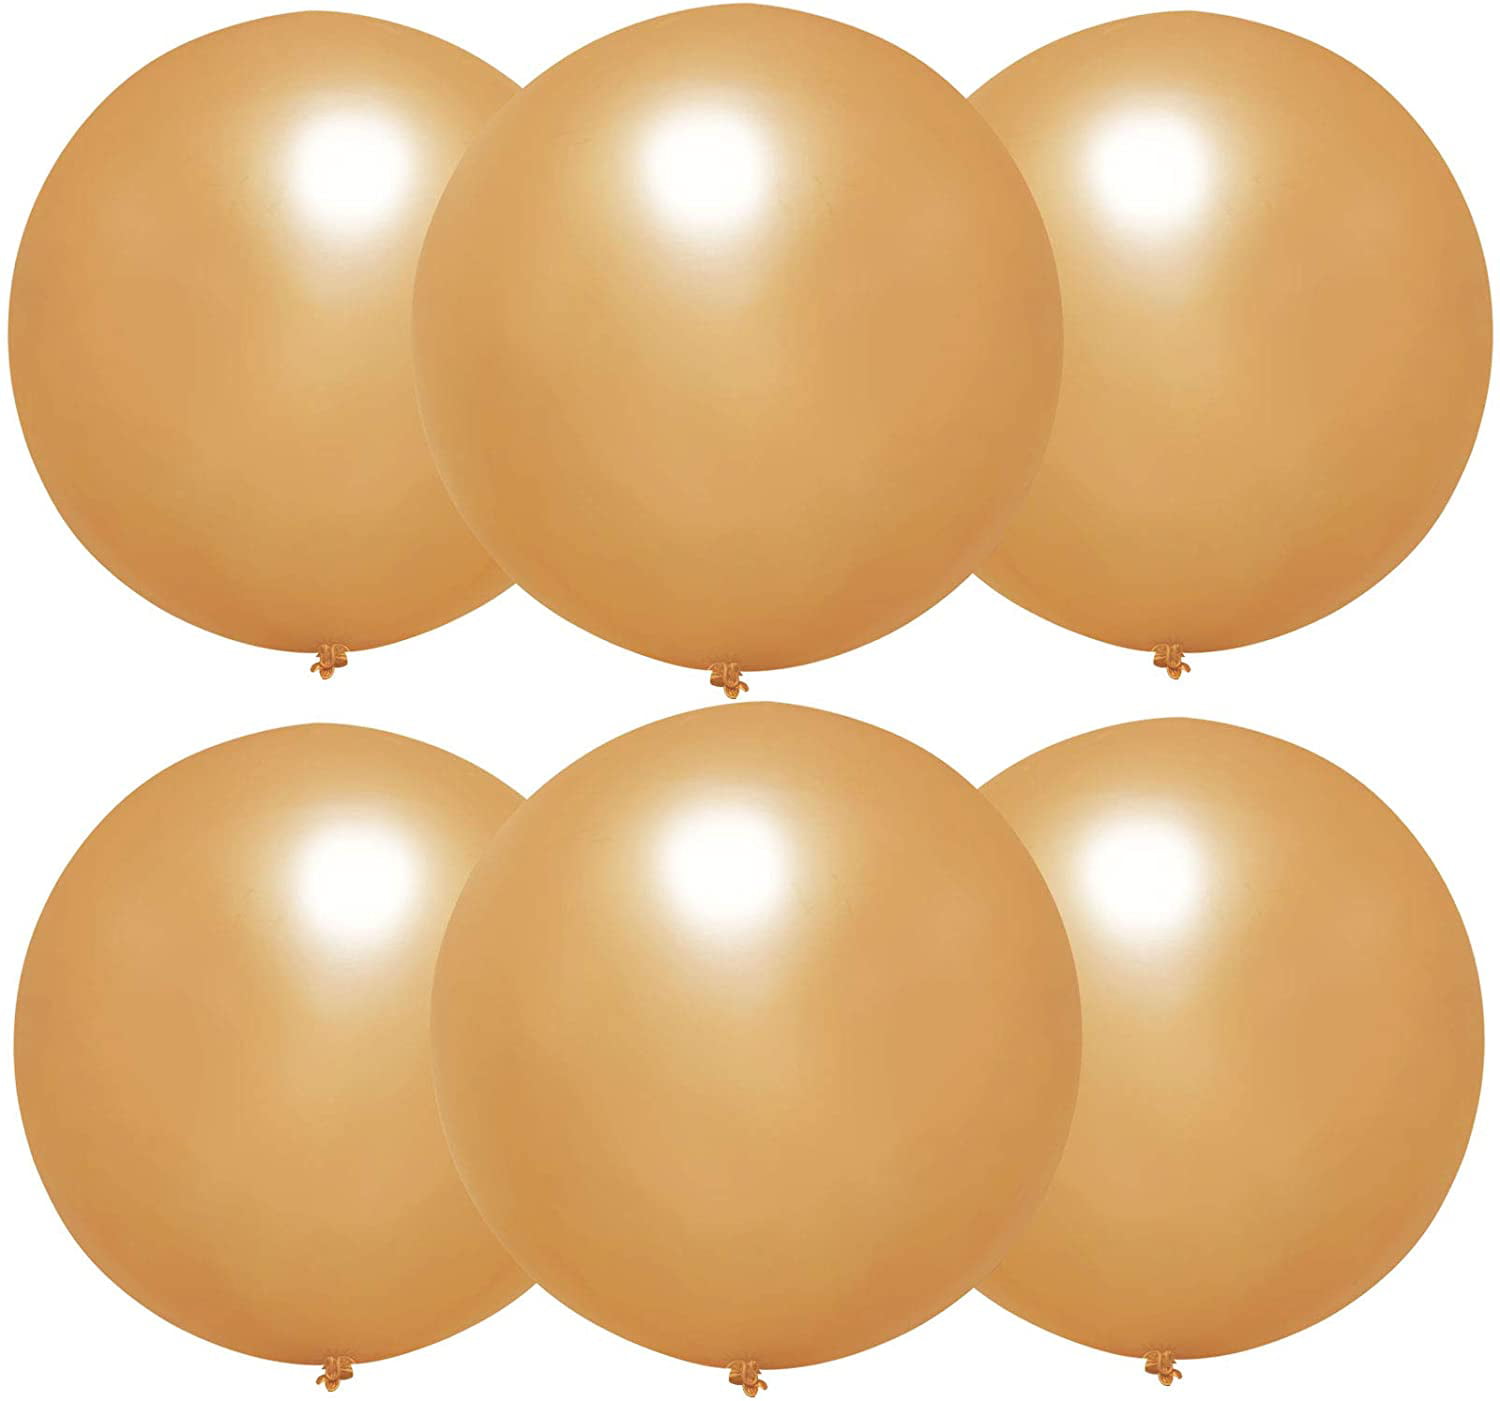 Electrainbow 8 Pack 36 Inch White Large Balloons & 50 Pack 10 Inch Colorful Balloons for Labor Day 2 Golden Ribbons Included,60 Pieces Carnival Easter Wedding Birthday